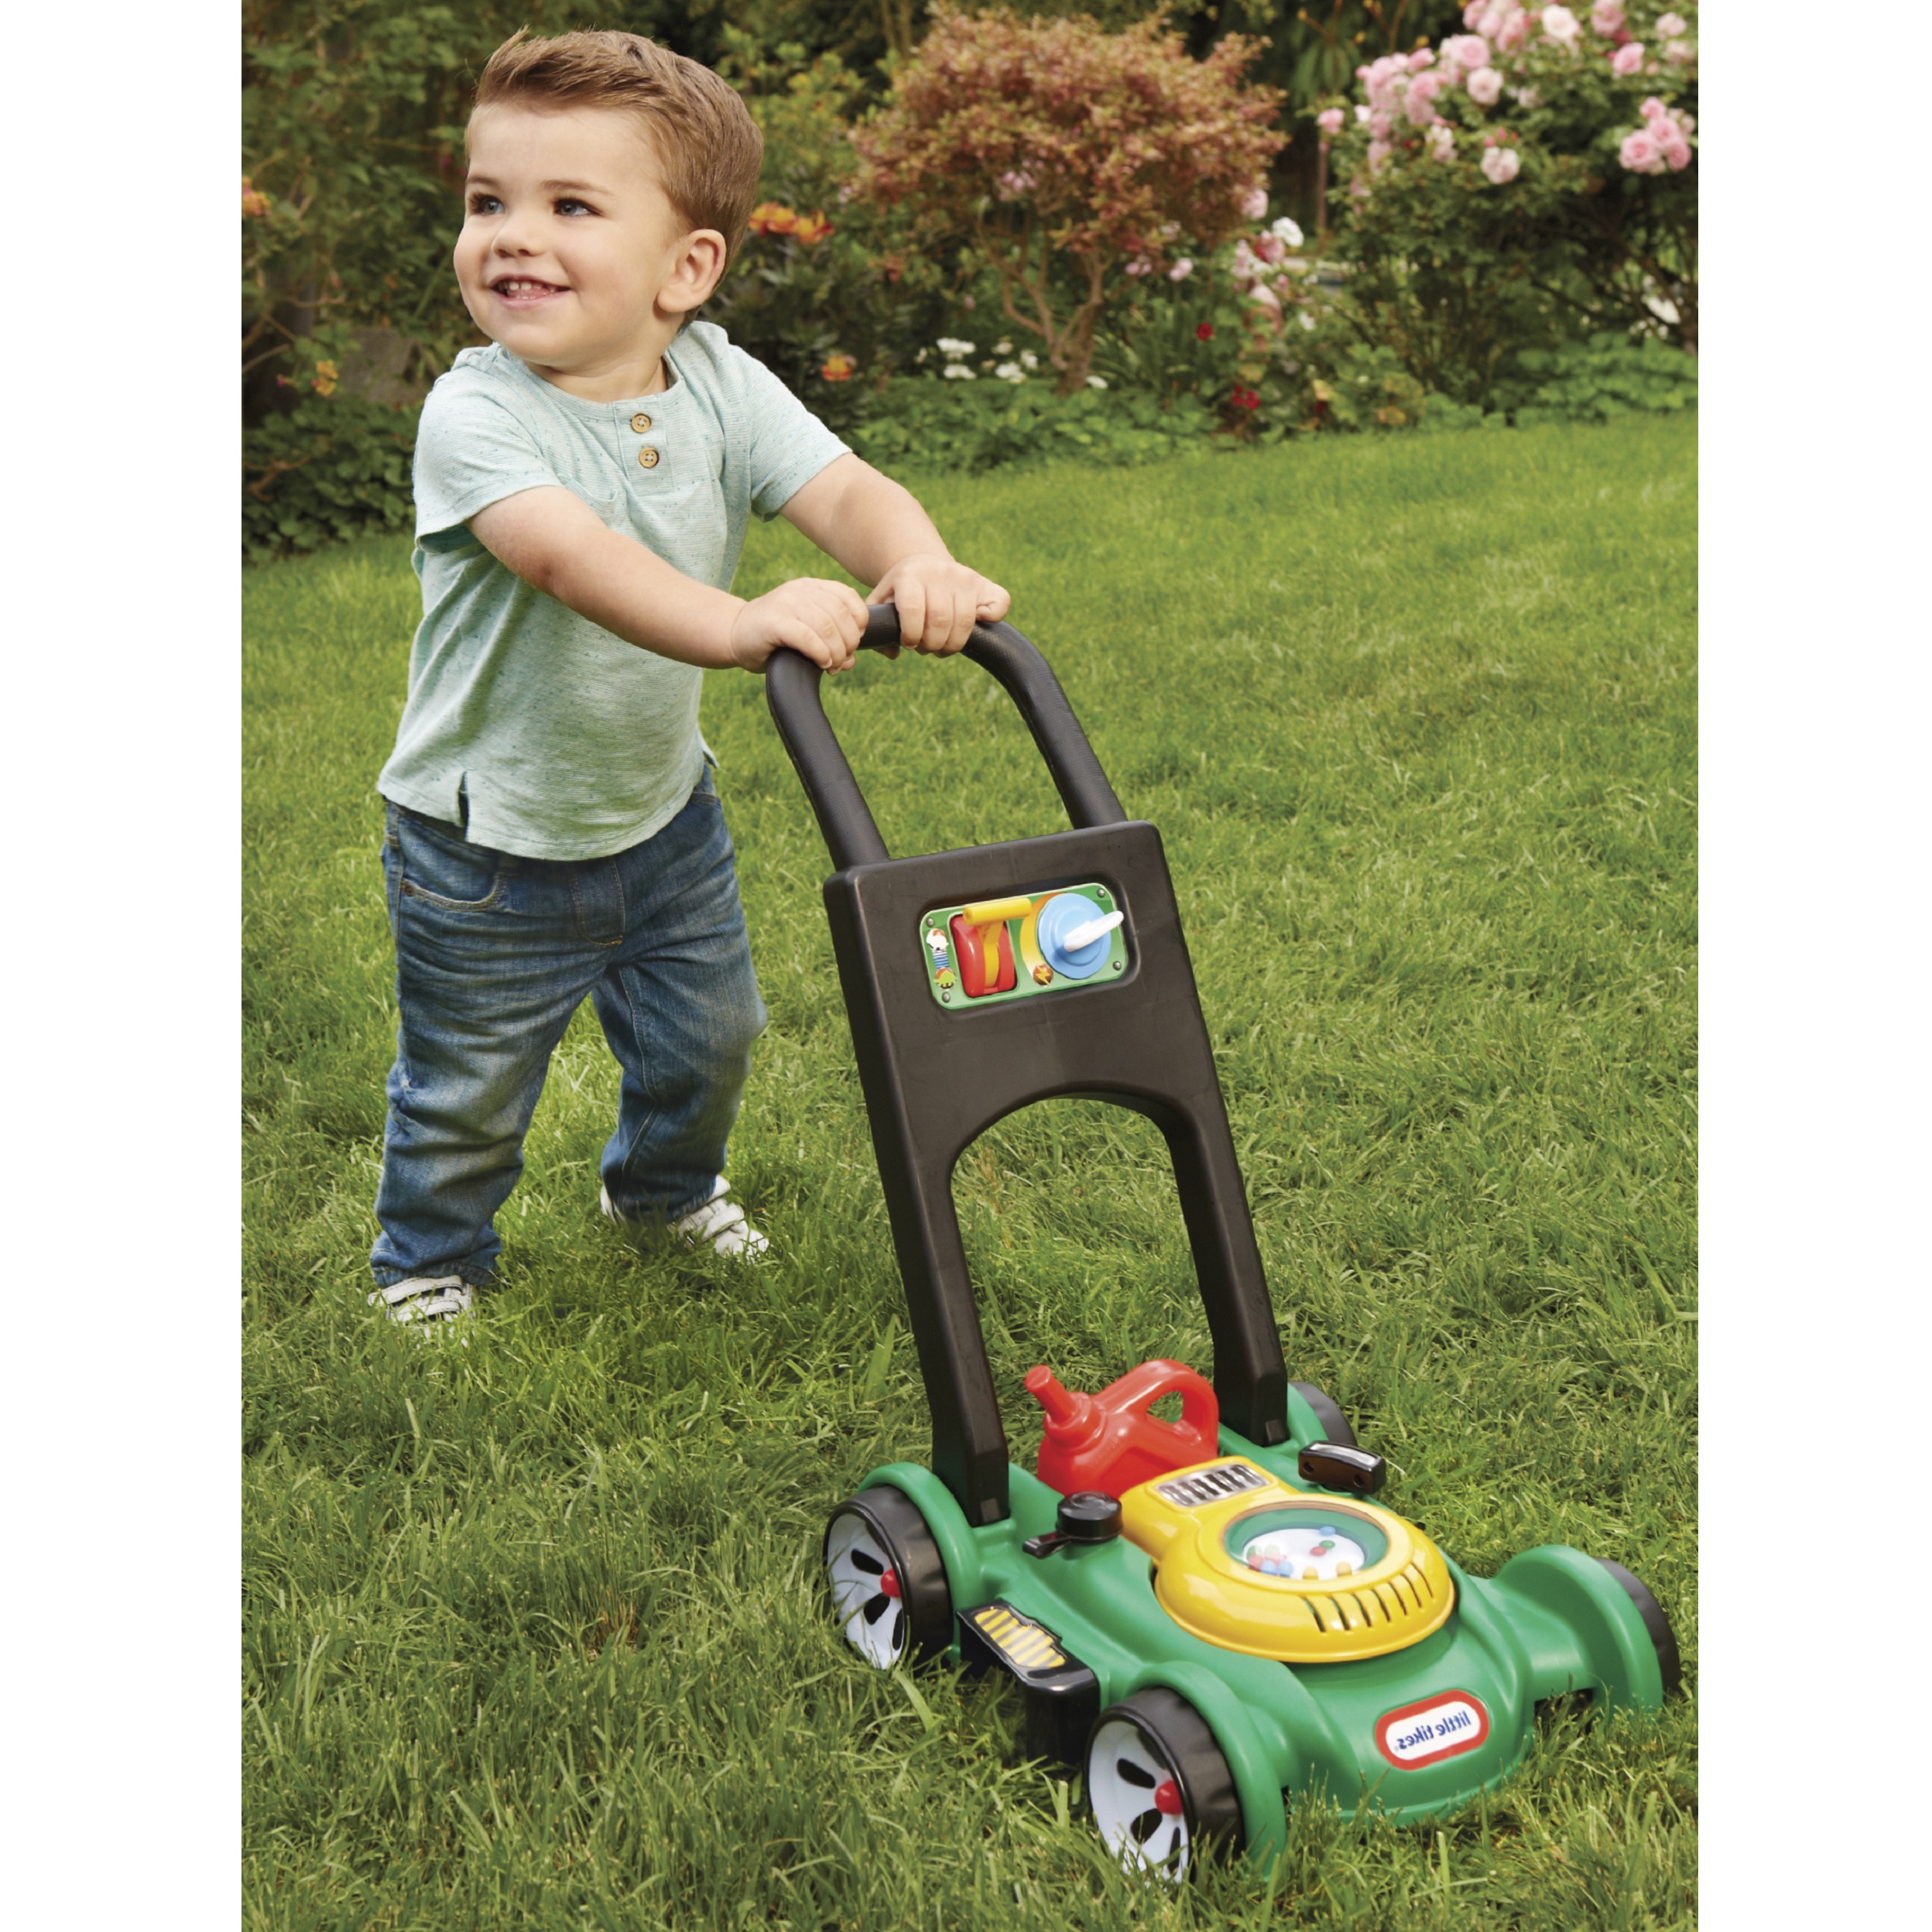 Little Tikes Gas N Go Mower Toddler Push Toy - For Kids Boys Girls Ages 1.5 Years and Older - image 3 of 7